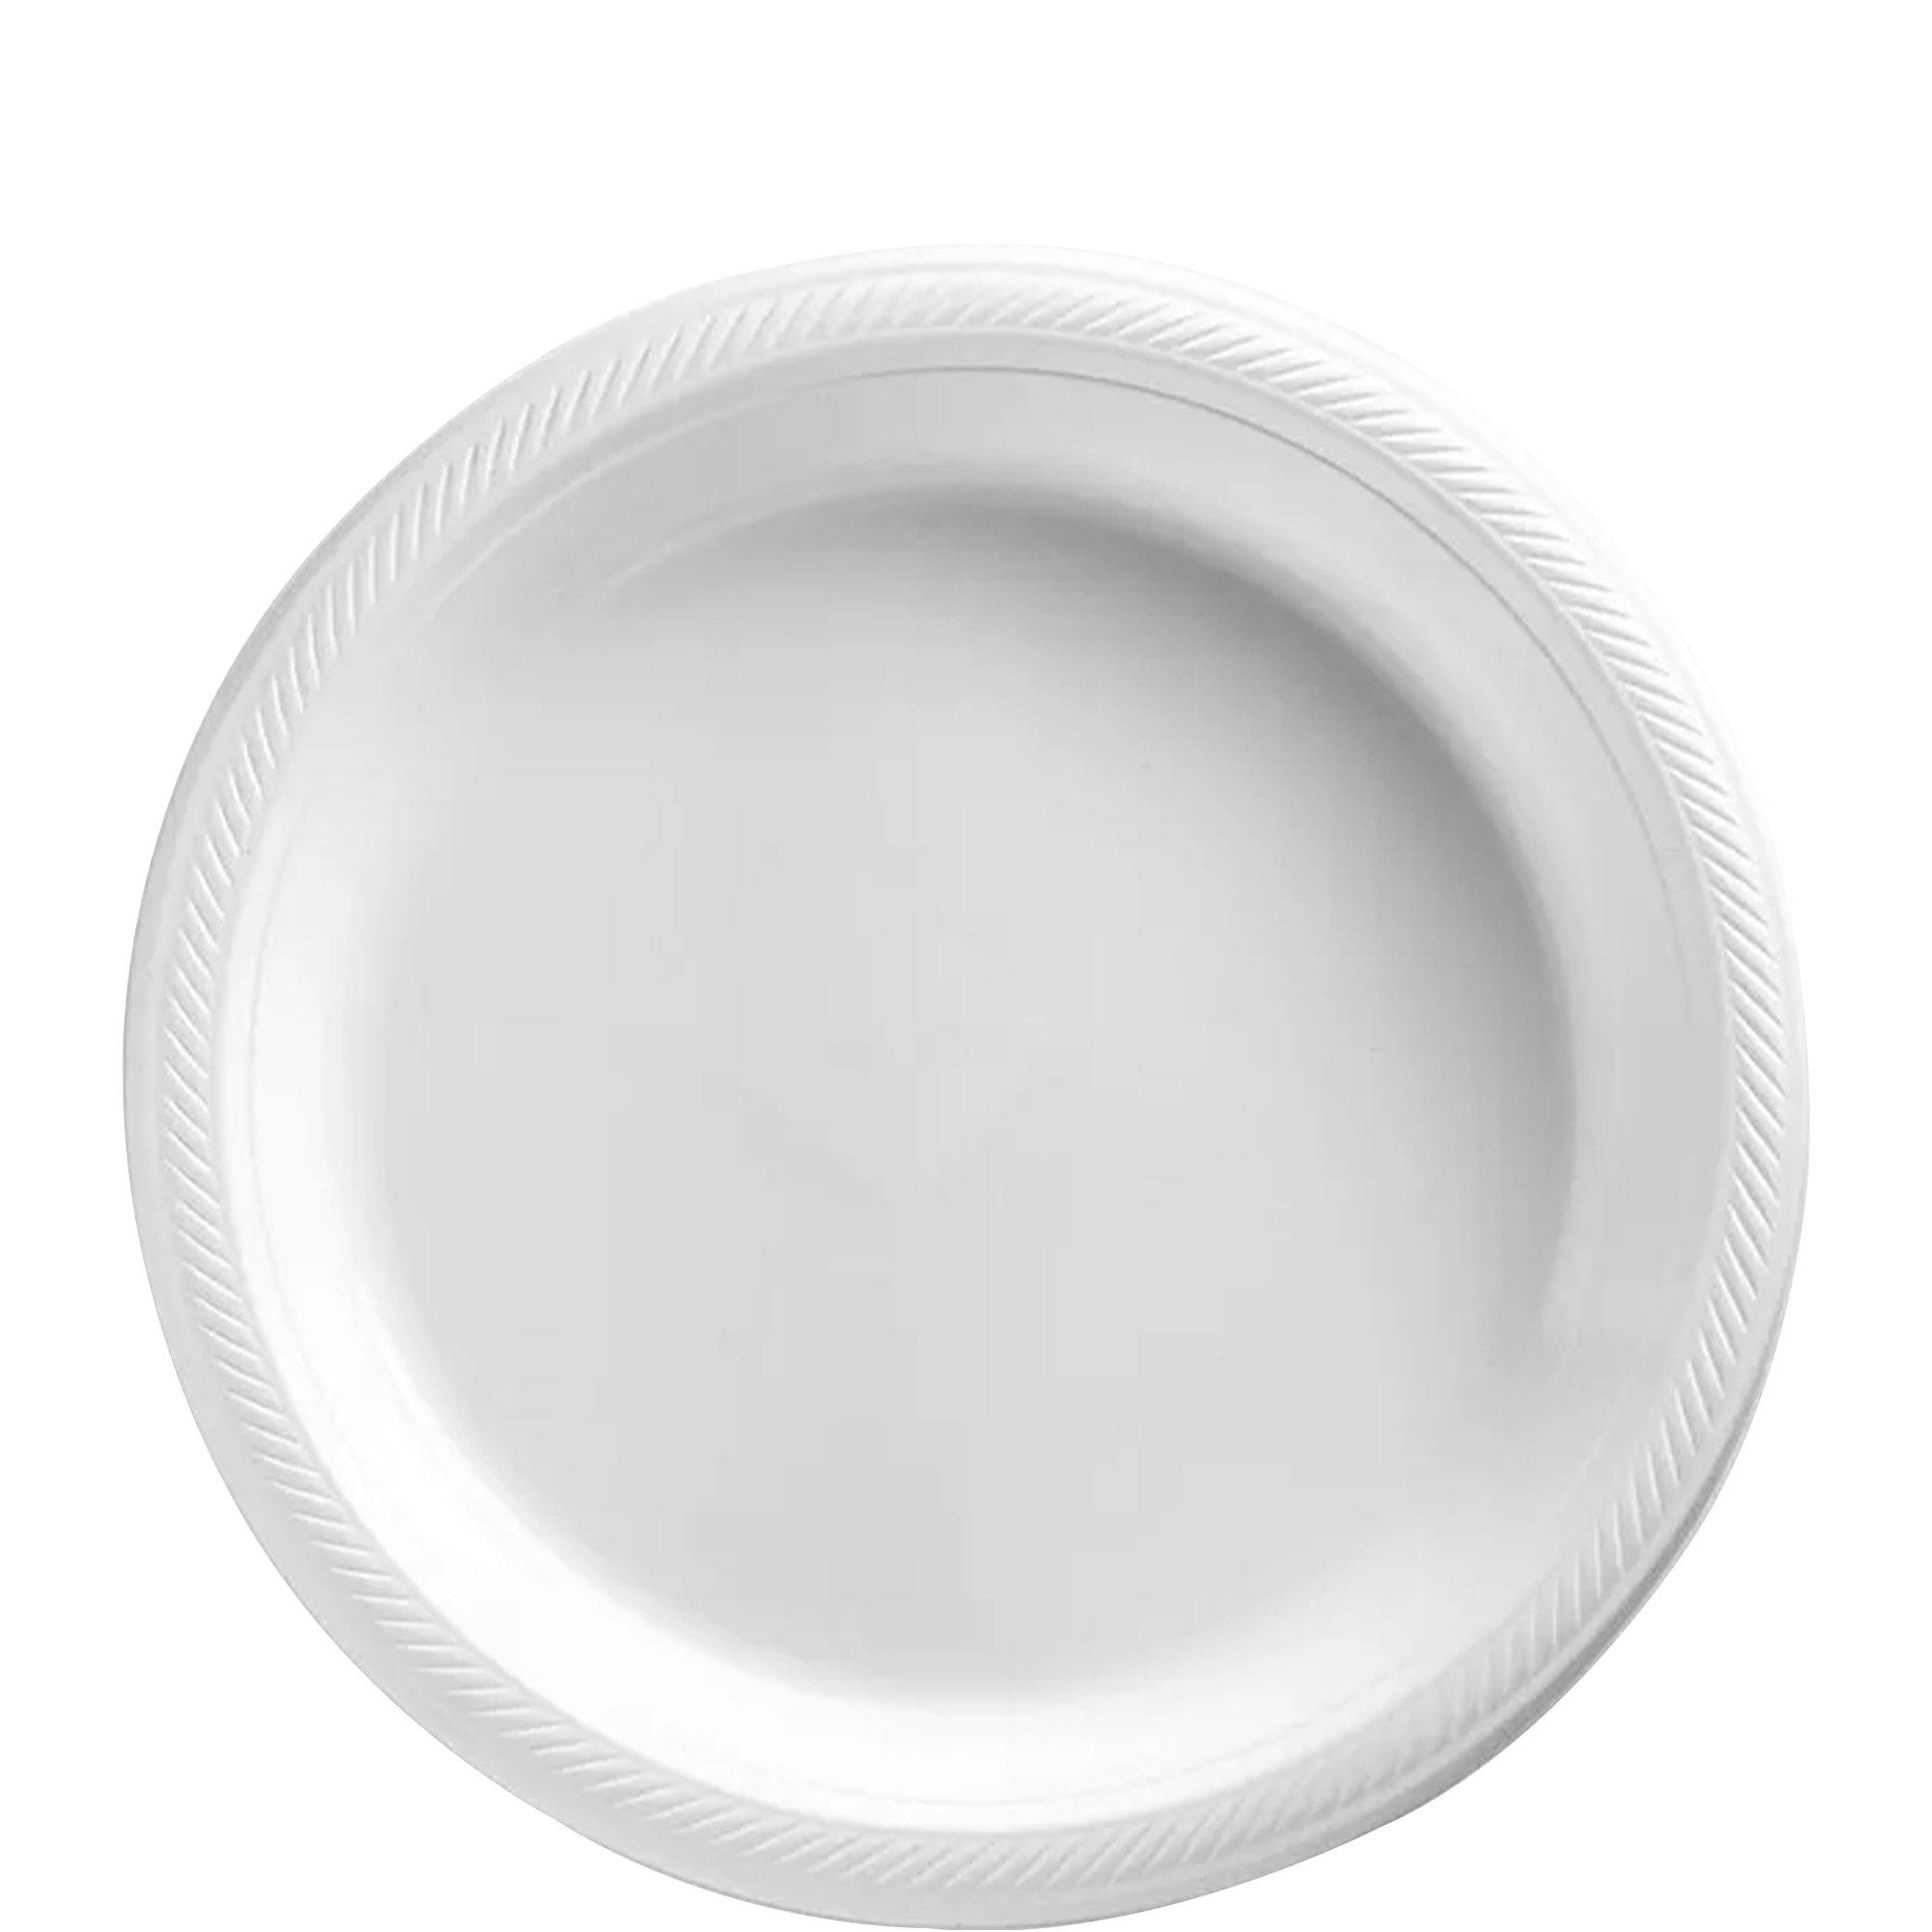 Wholesale Cake Plates, Disposable Large Paper Plates, Children'S Birthday  Parties, White Meal Plates, Picnic Plates, Dessert